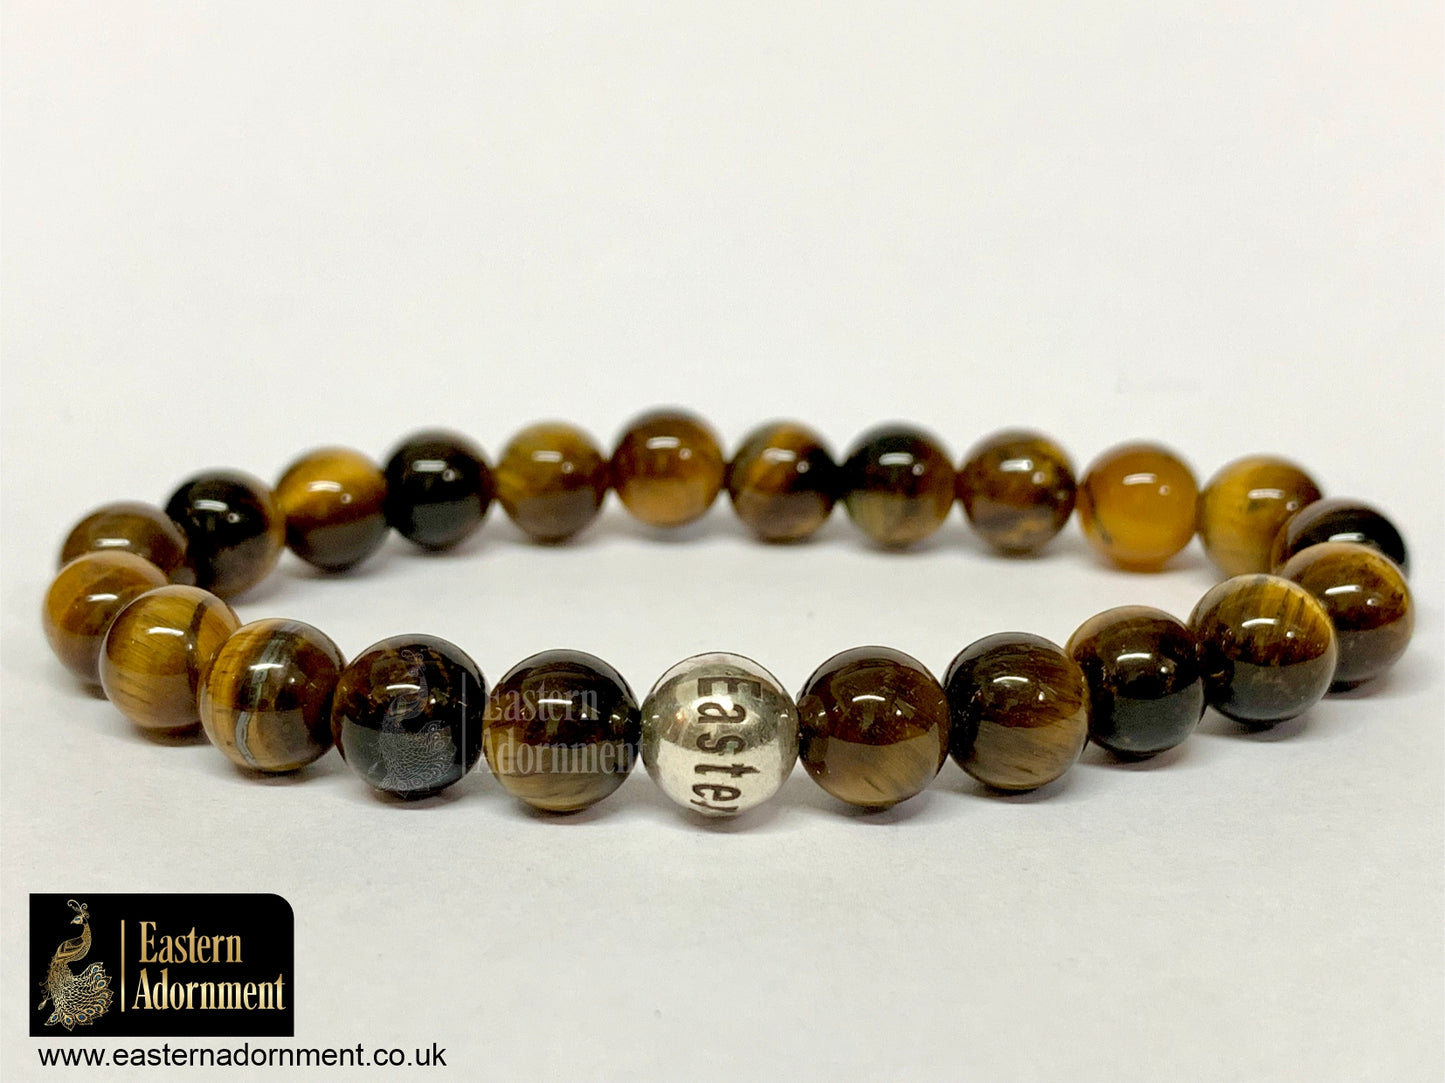 Golden Tiger's Eye bead bracelet, with Eastern Adornment branded silver bead.